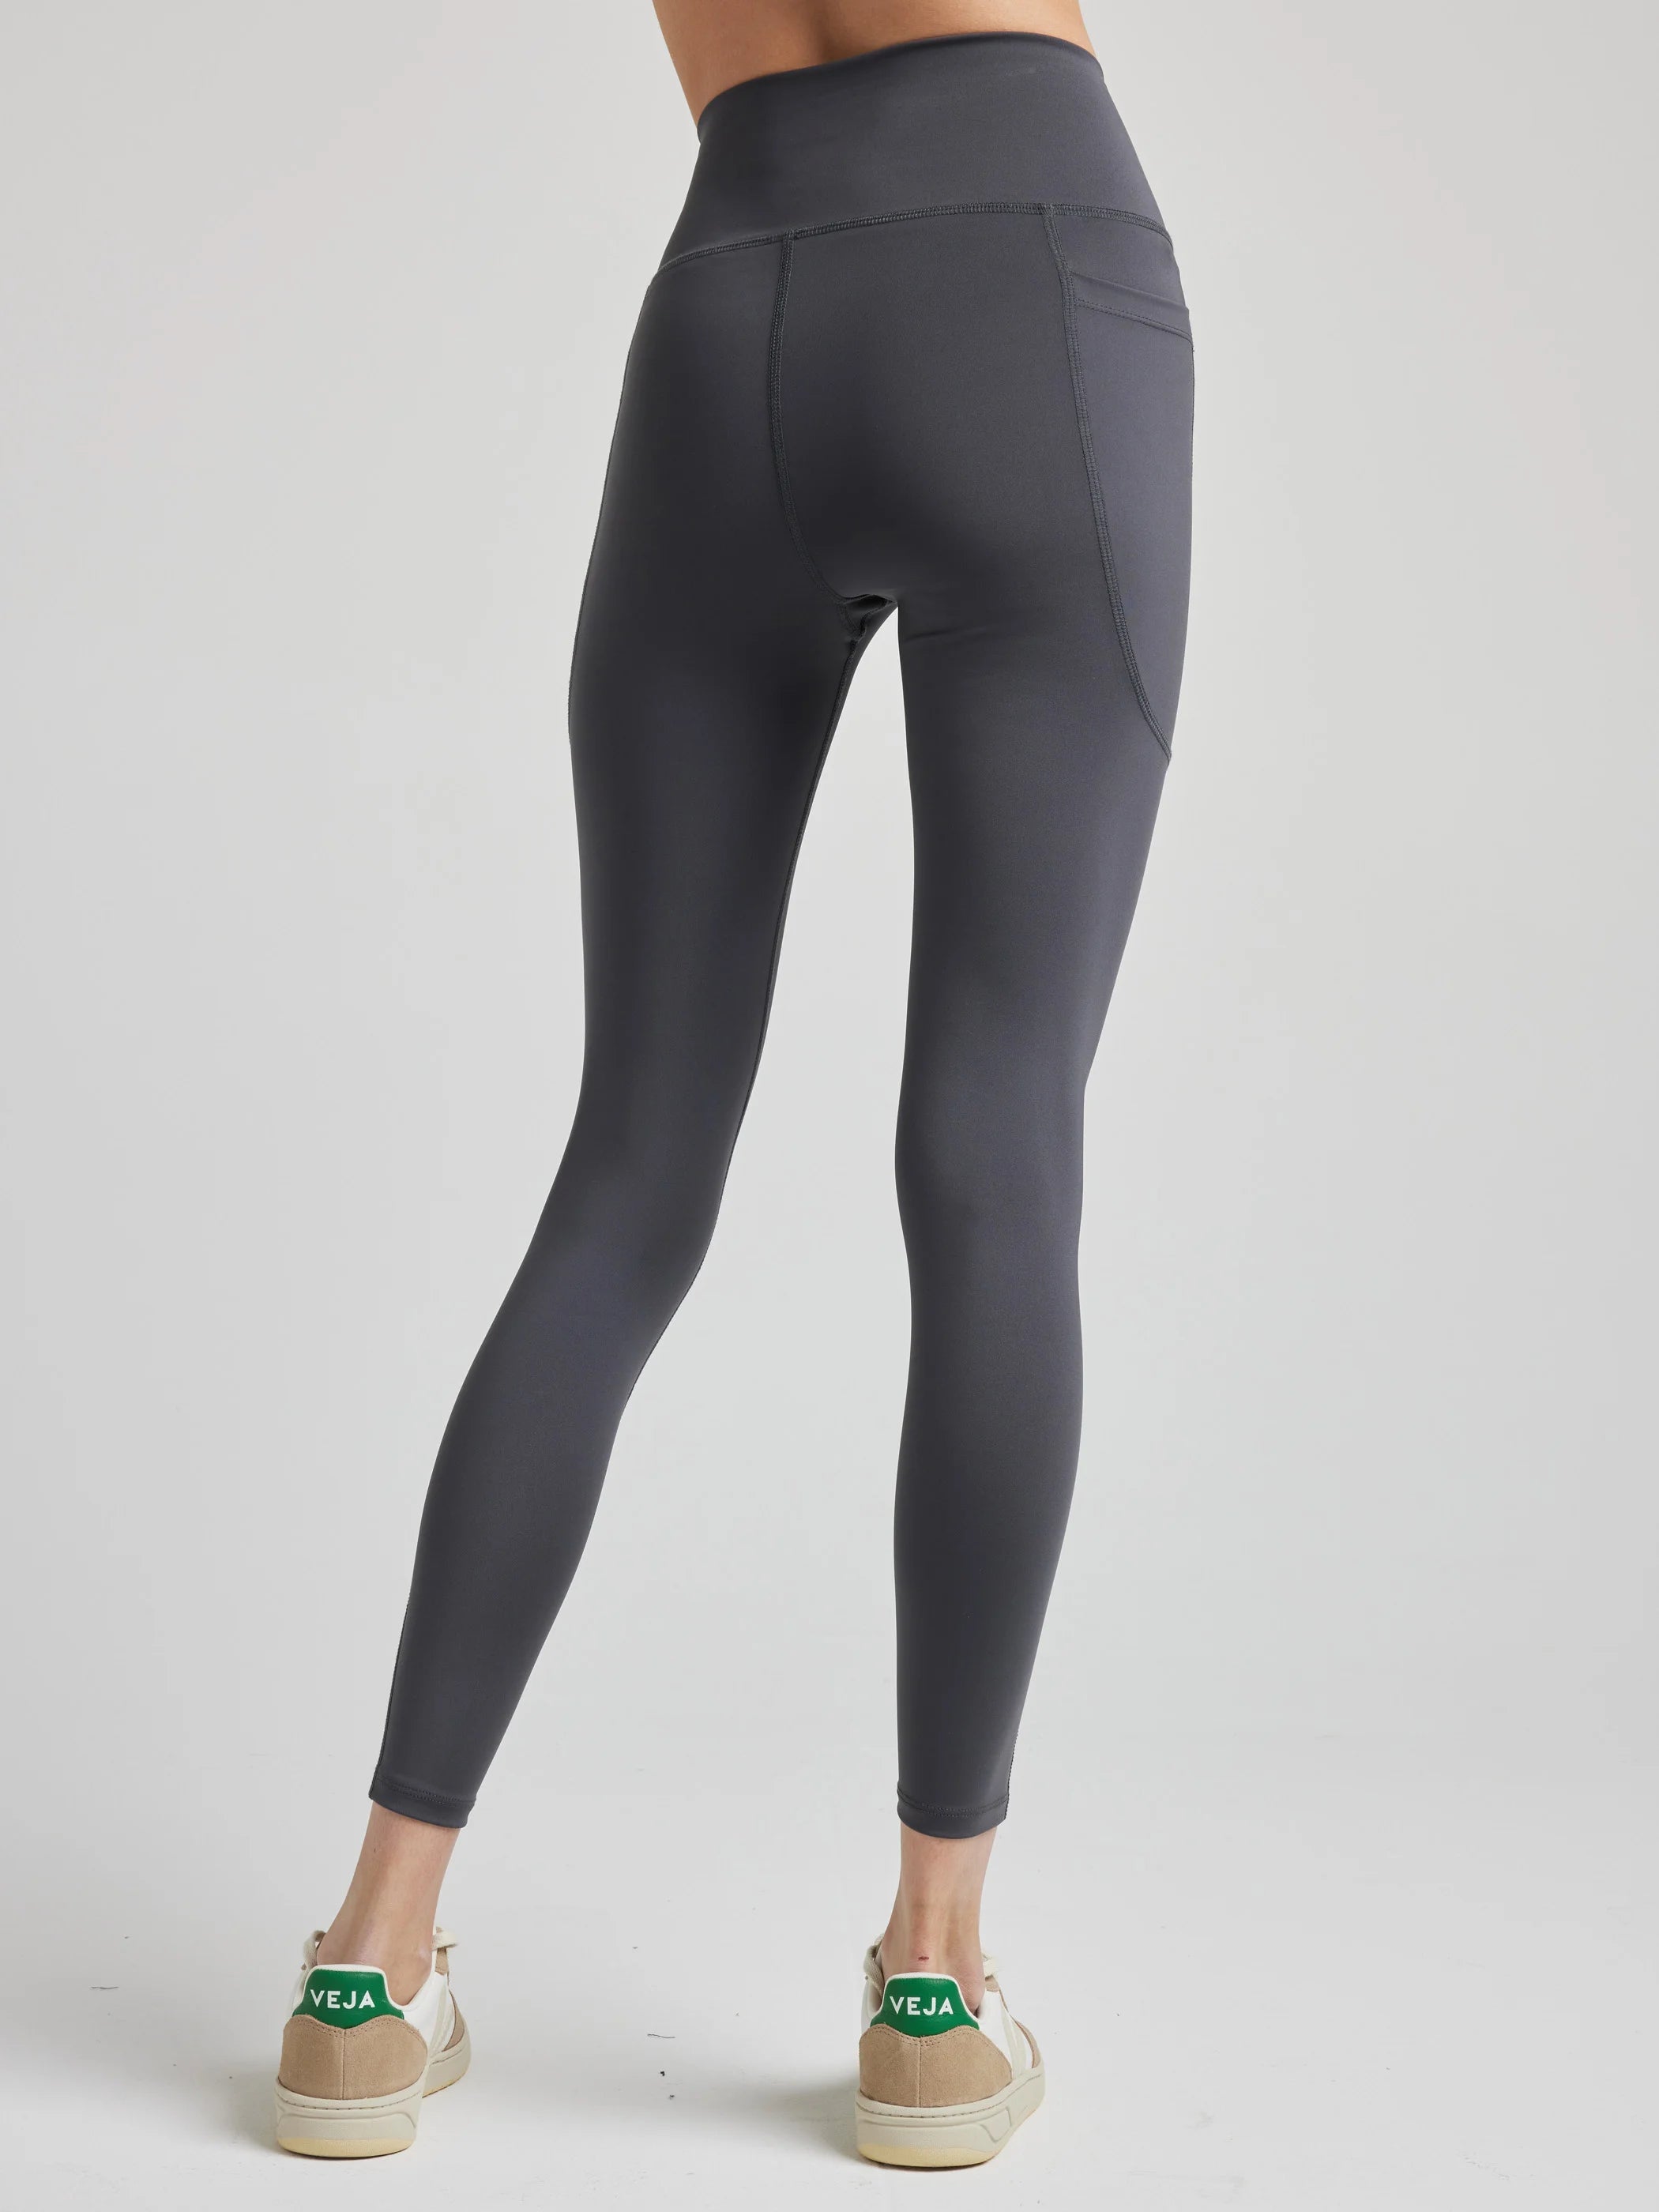 Pact Womens Organic Cotton Pureactive Pocket Leggings Small Grey New  Athletic